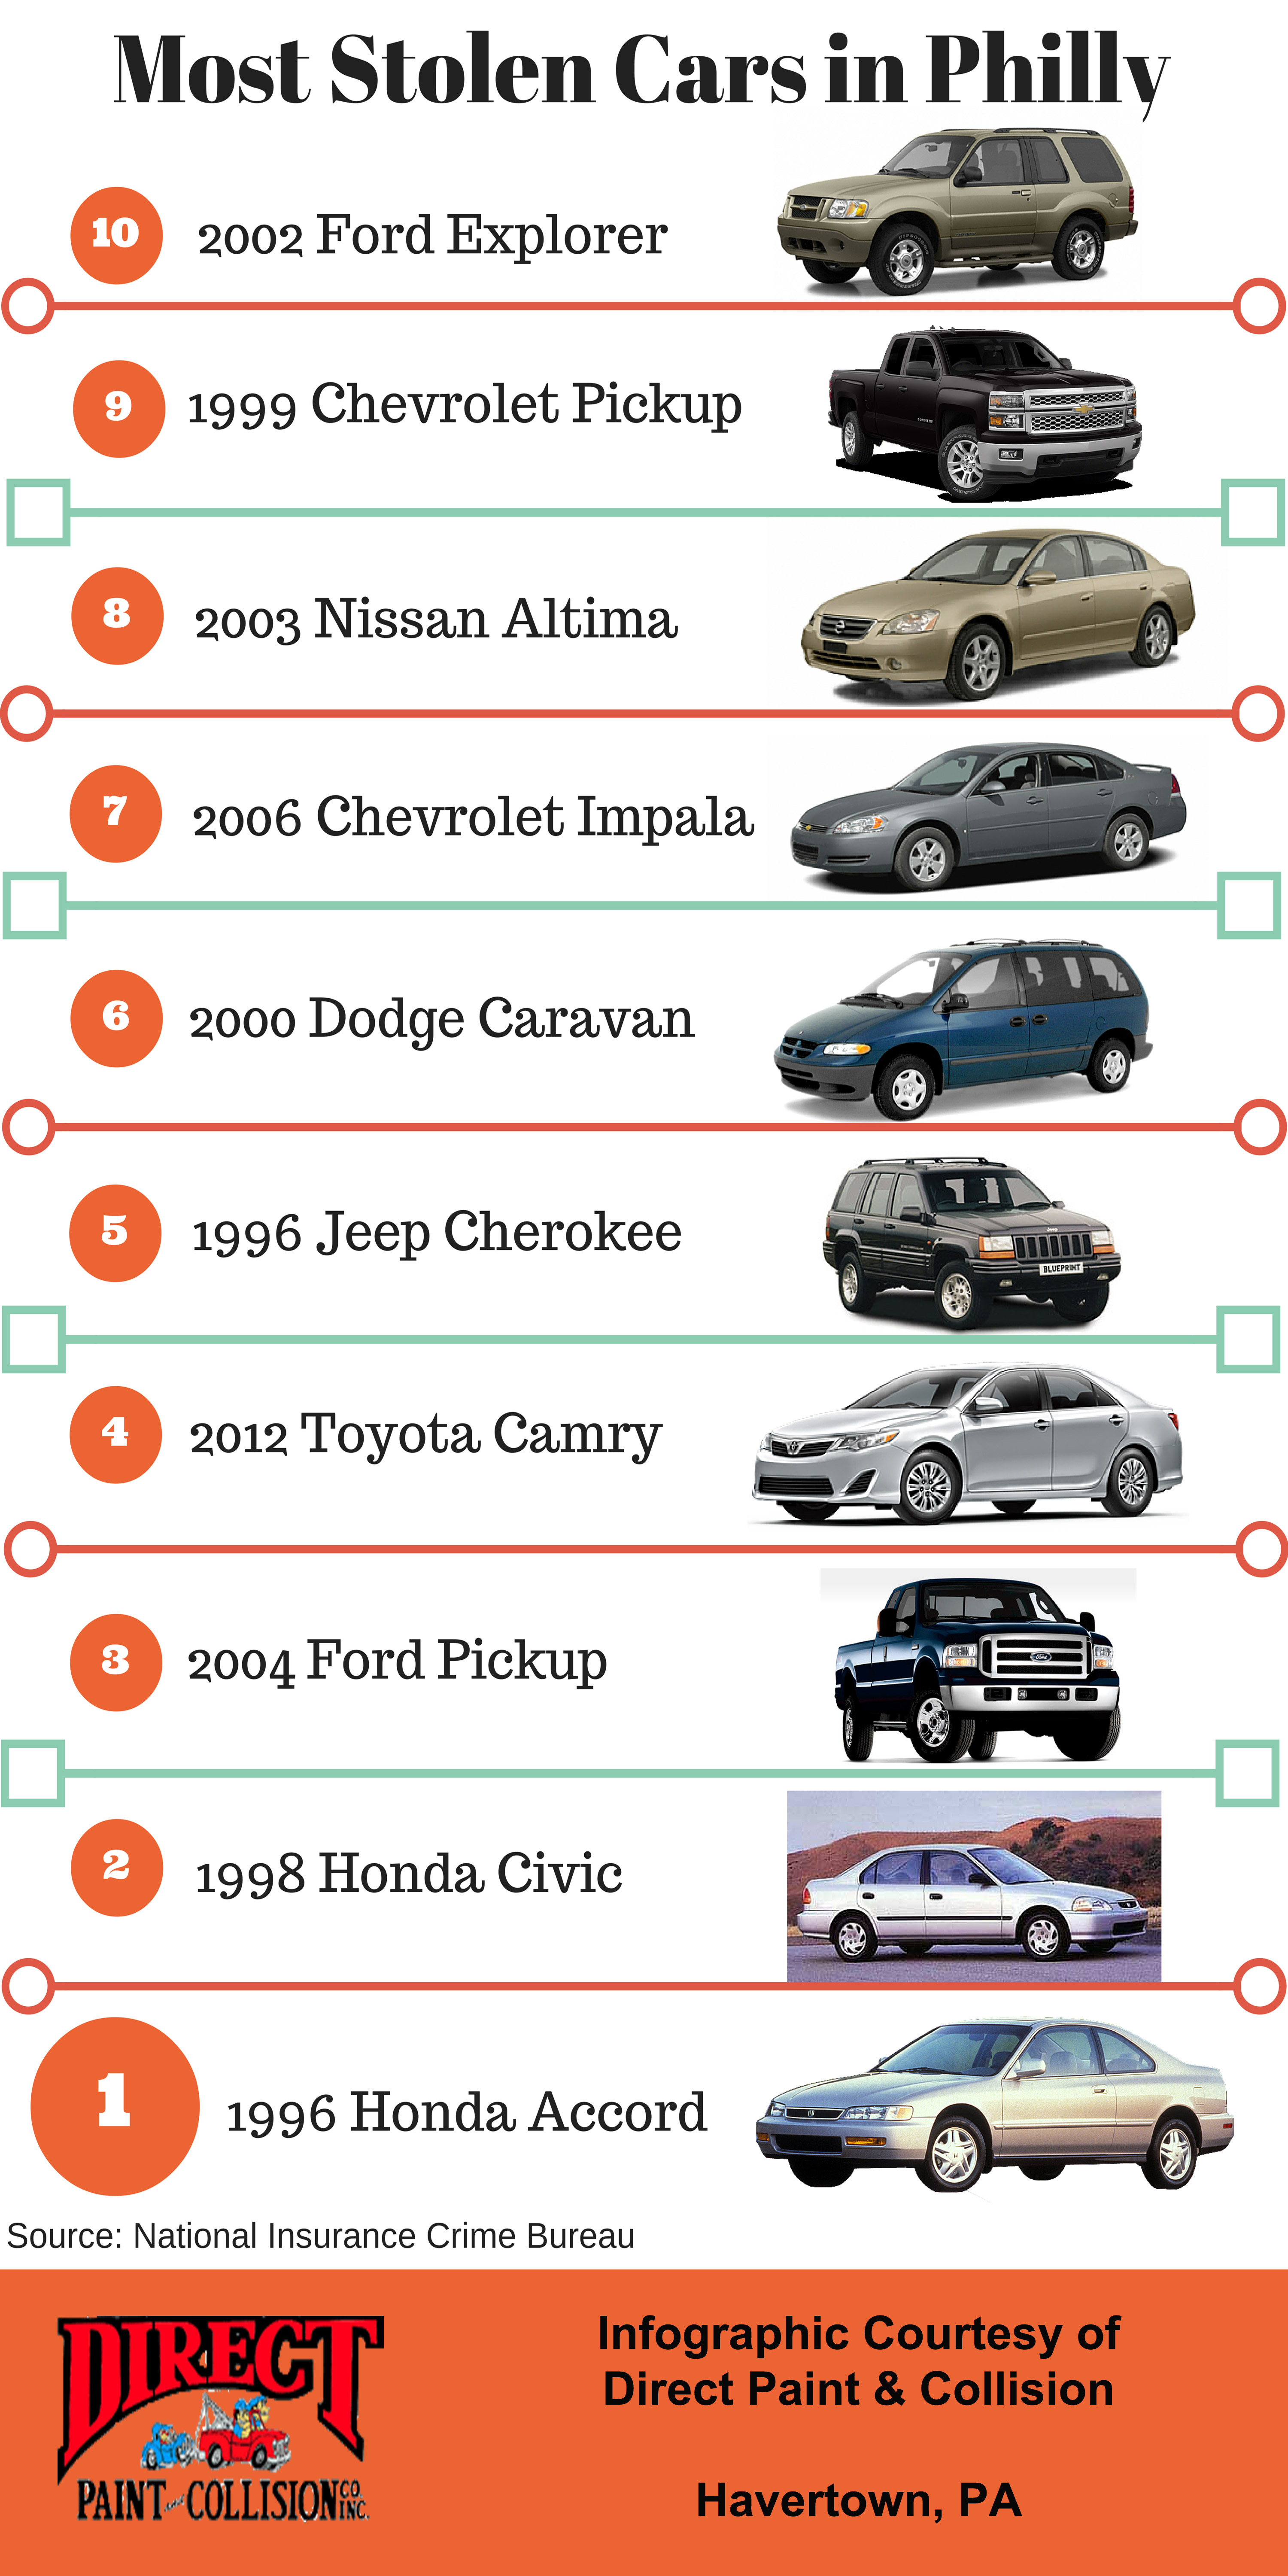 dodge models top list of most-stolen vehicles The Most Stolen Cars in Philly [Infographic] - Direct Paint and